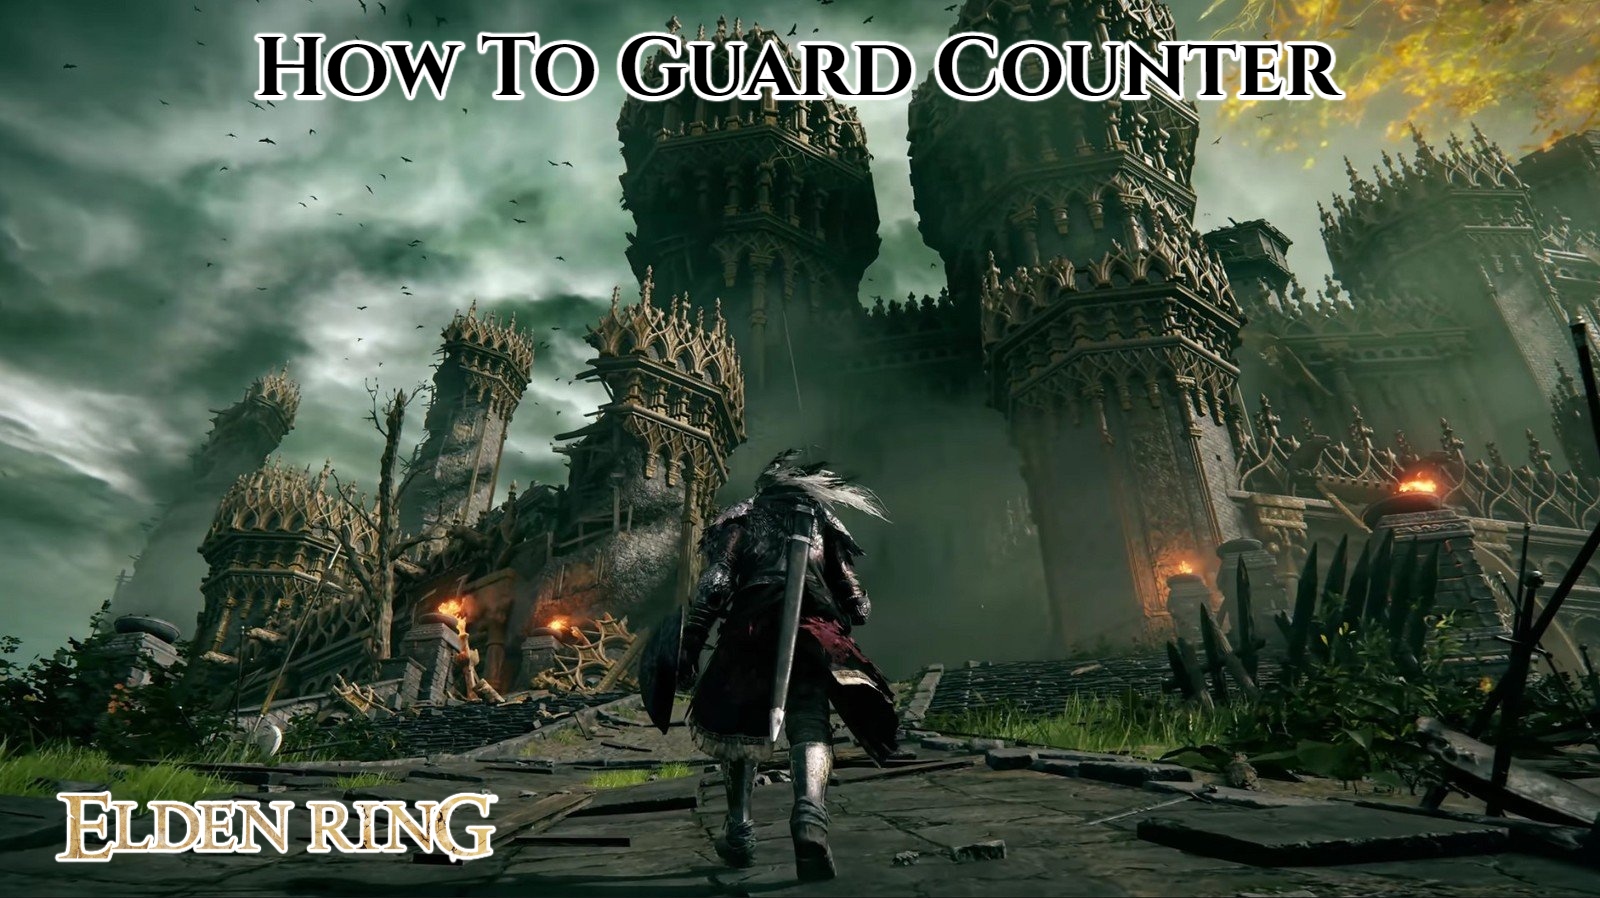 You are currently viewing How To Guard Counter Elden Ring PC